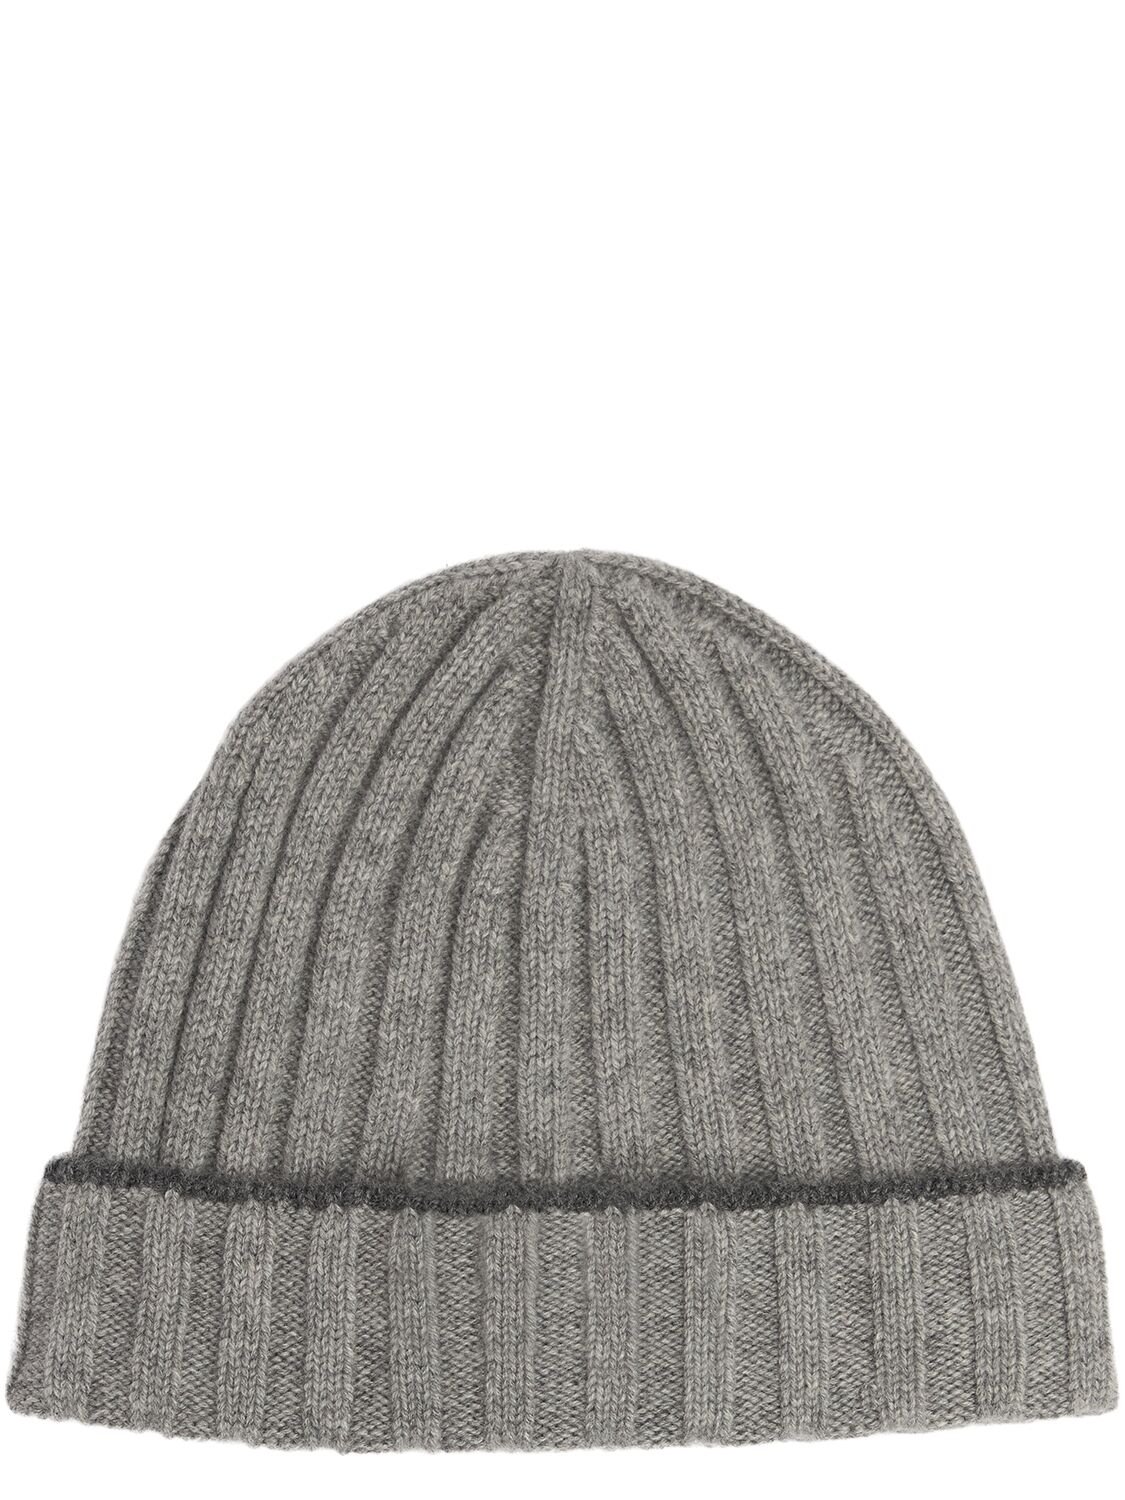 Brunello Cucinelli Cashmere Ribbed Knit Beanie Hat In Gray